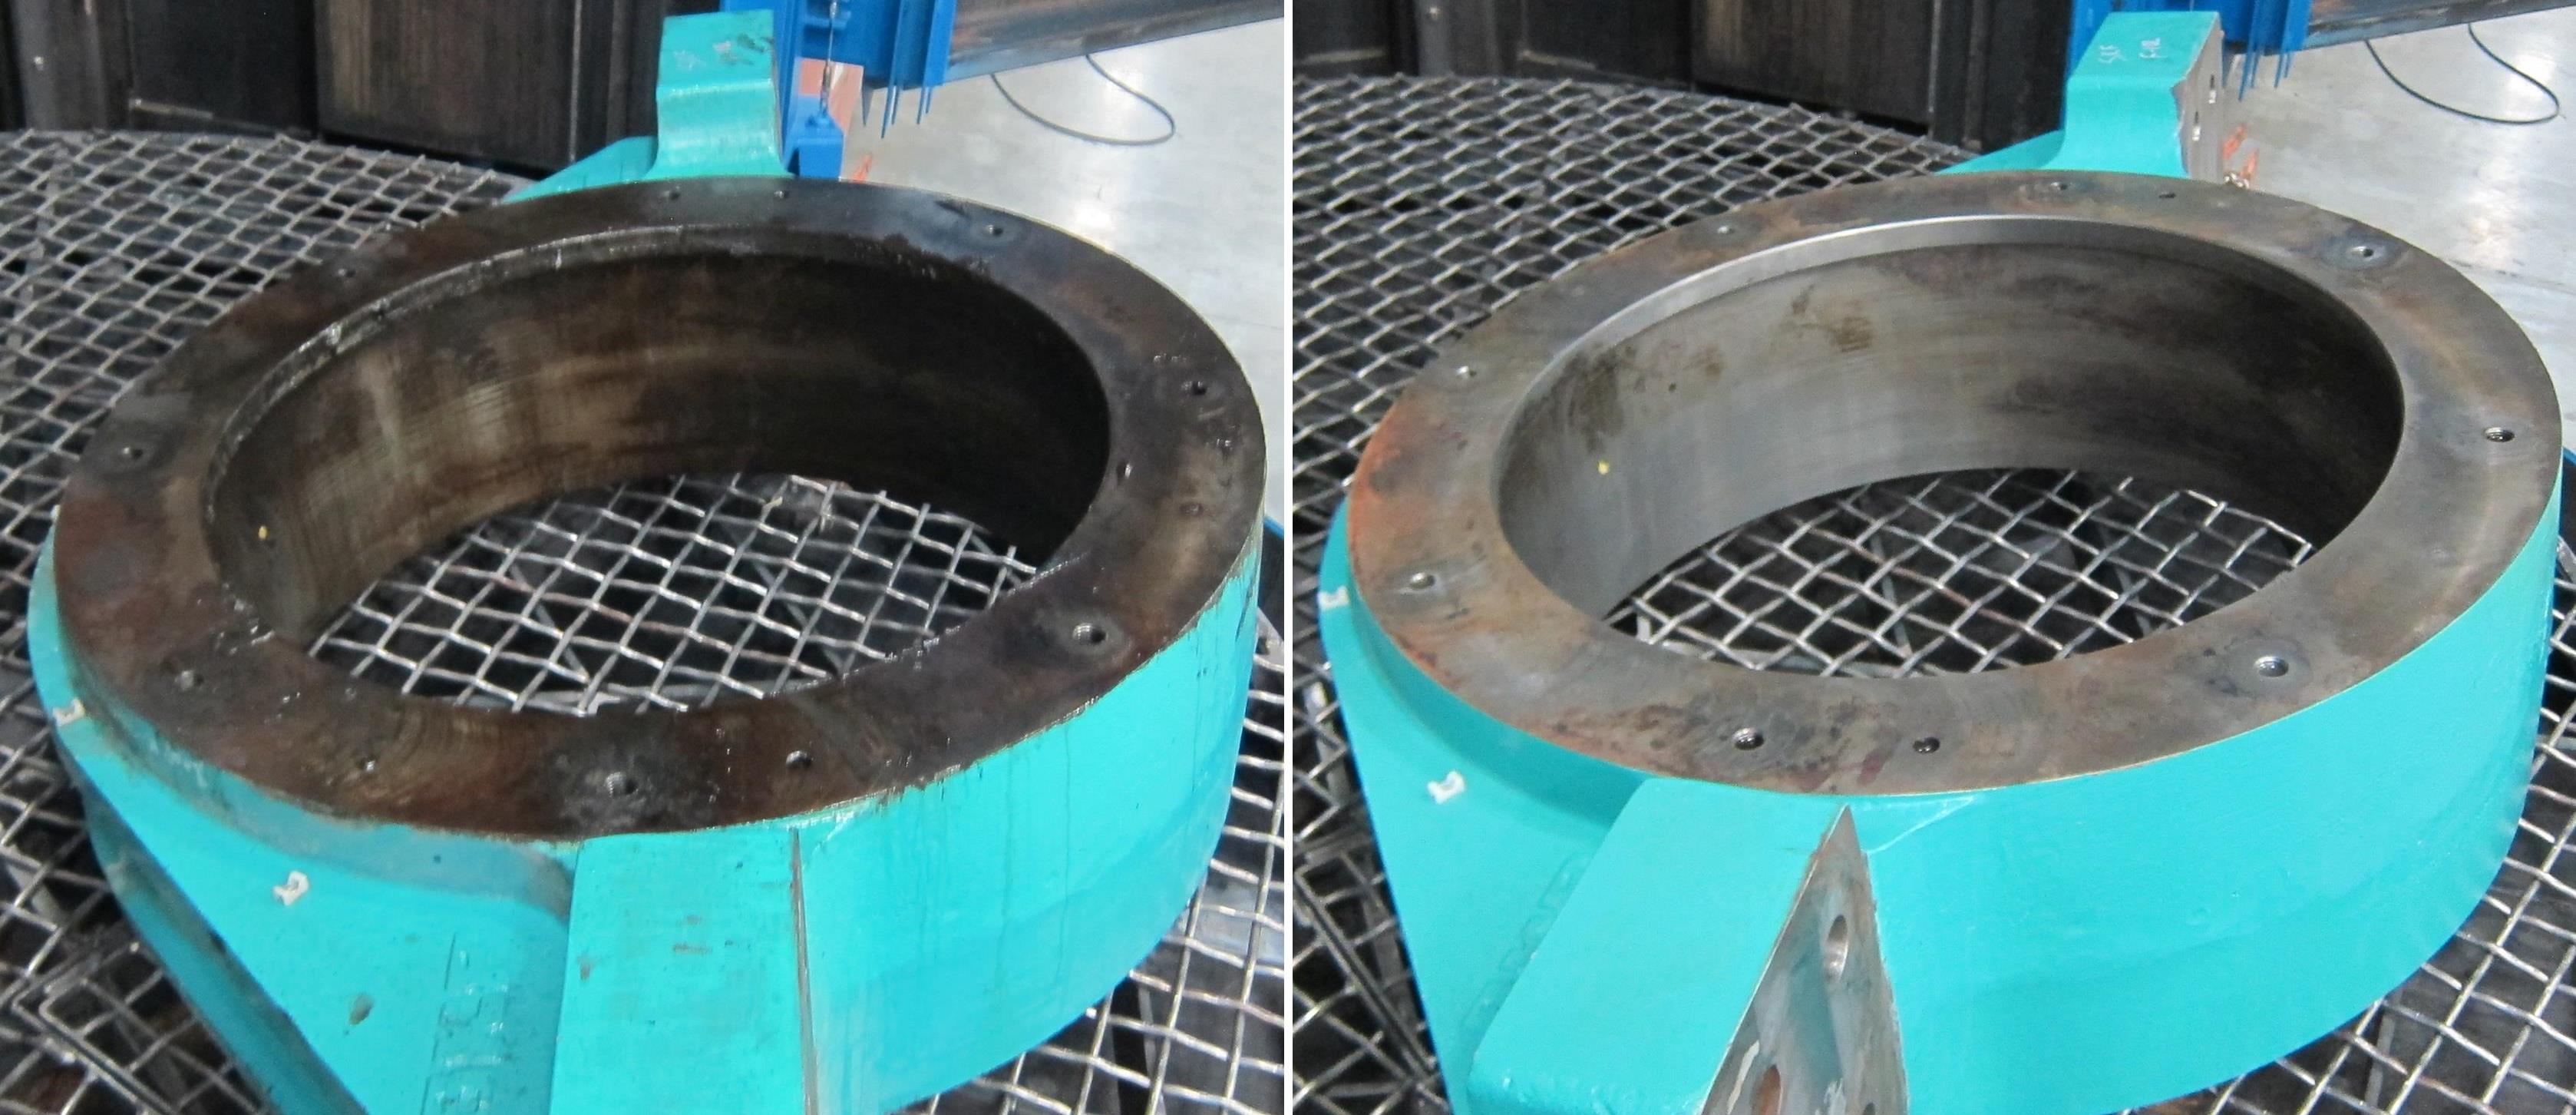 StingRay Heavy Duty Parts Washer Windmill Turbine Component Before and After Cleaning